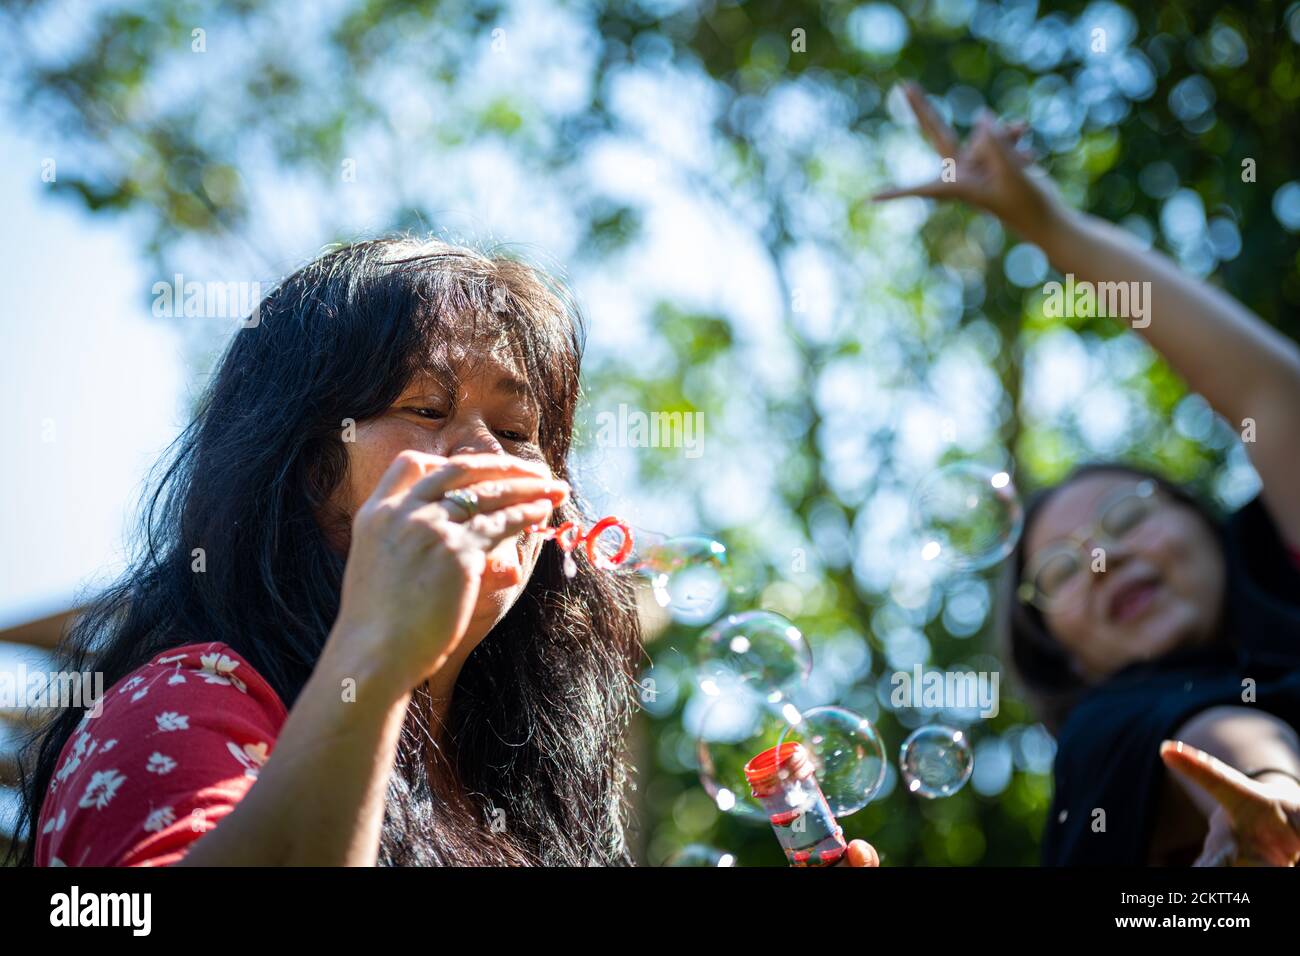 Closeup picture of a middle-aged, in her 50s, Asian woman with soap bubbles. A preteen girl and green leaves in the background Stock Photo